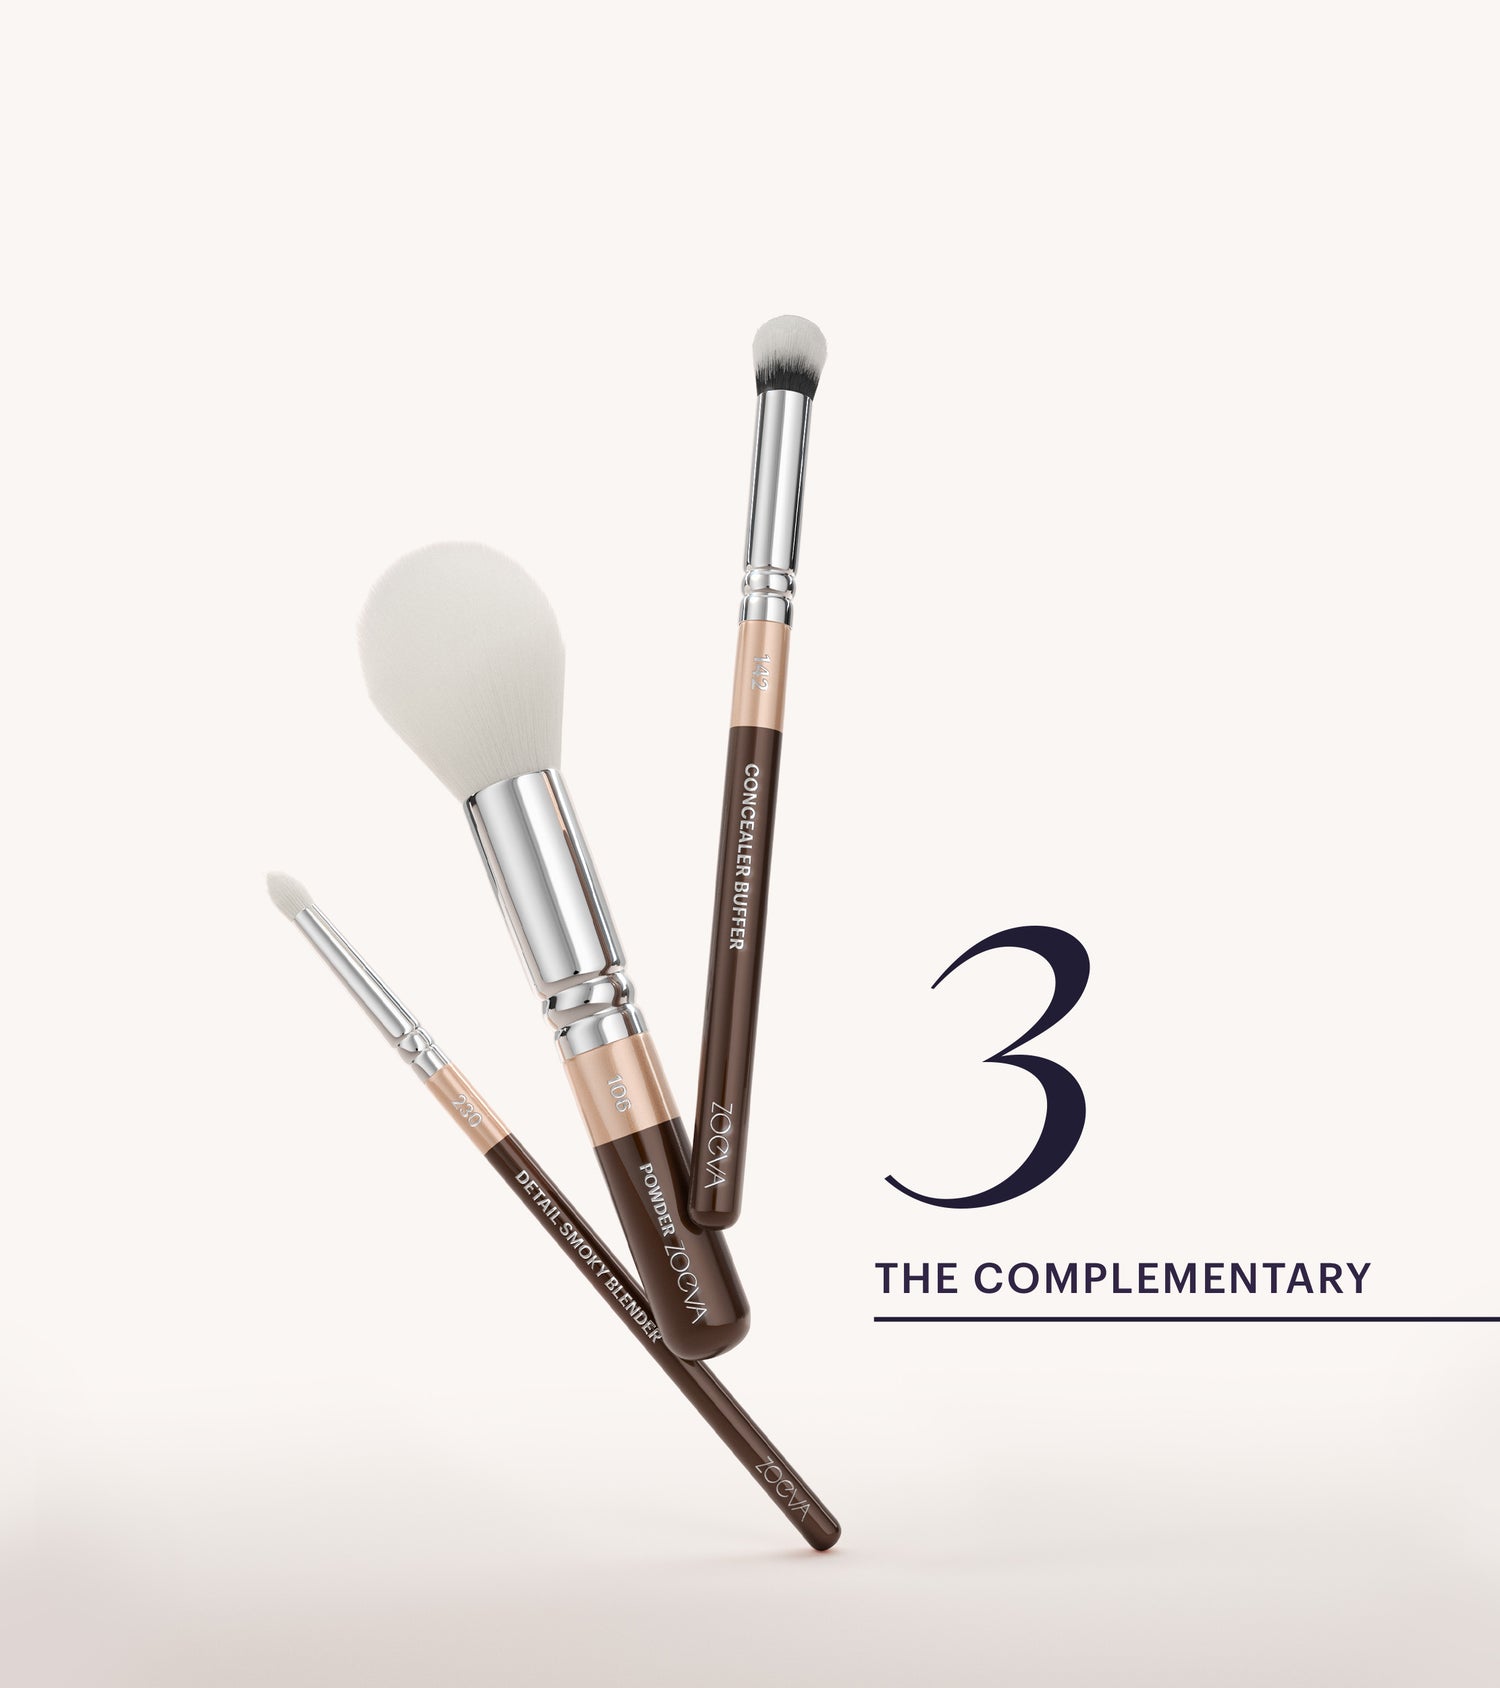 ZOEVA - The Complete Pinselset (Chocolate) - BRUSH SET